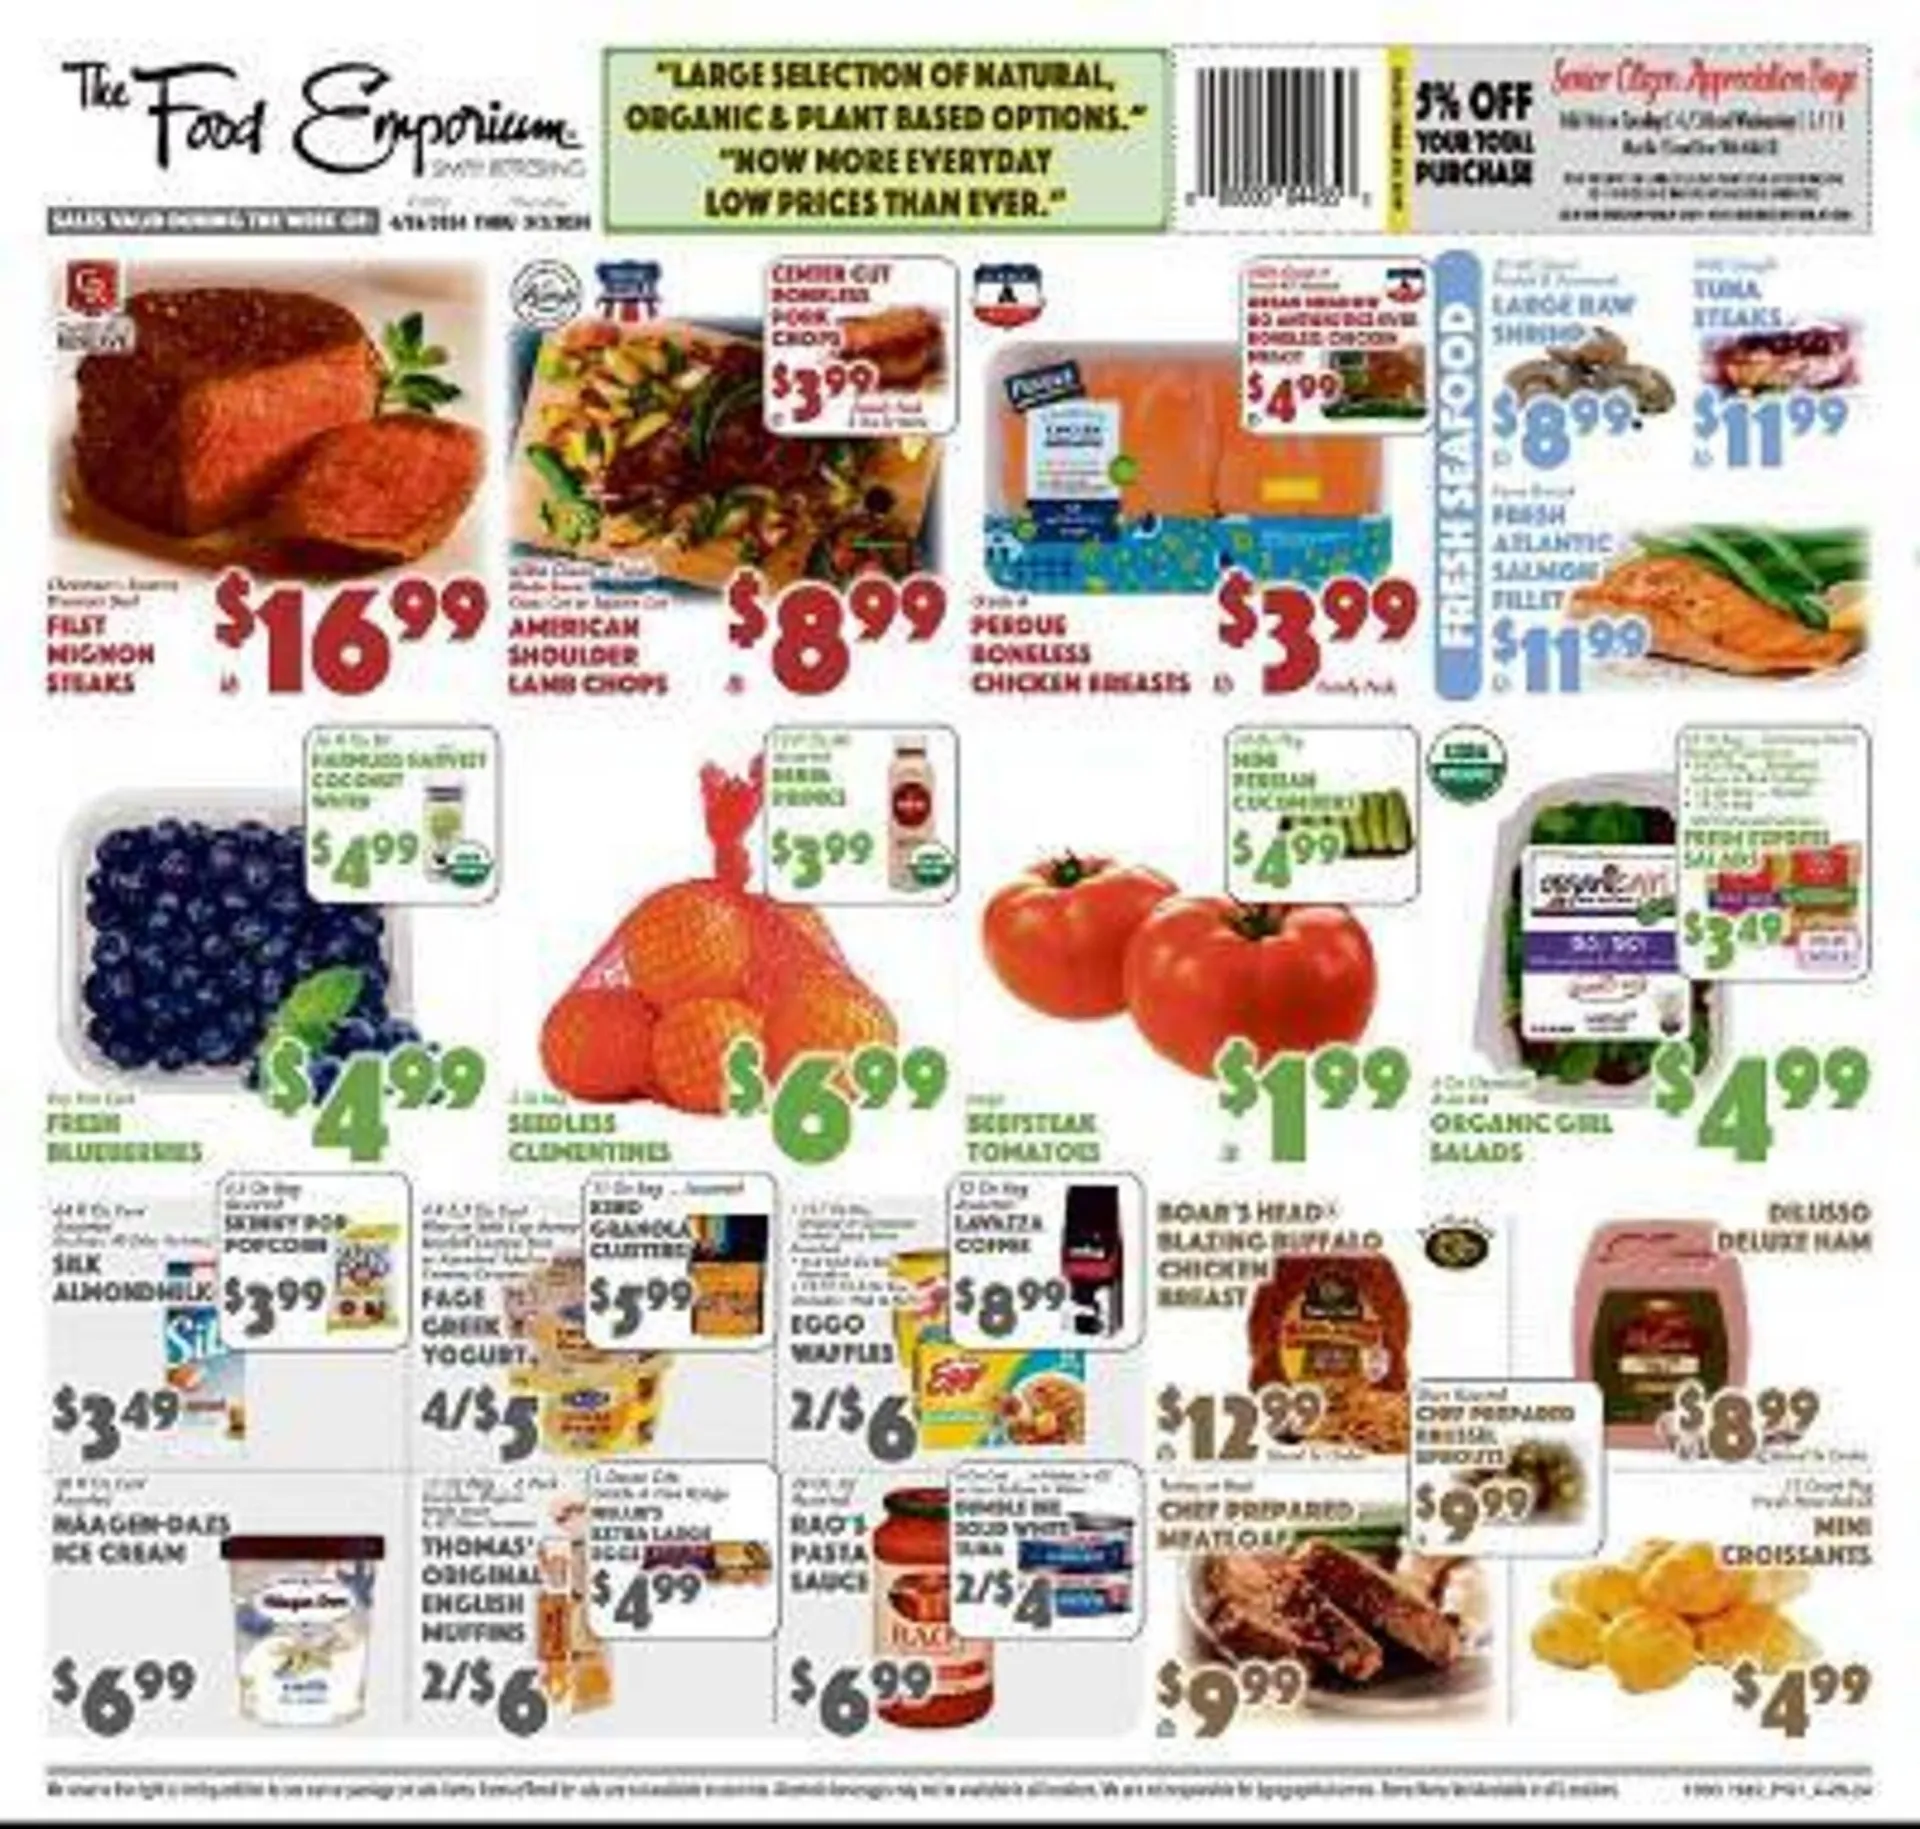 The Food Emporium Weekly Ad - 1